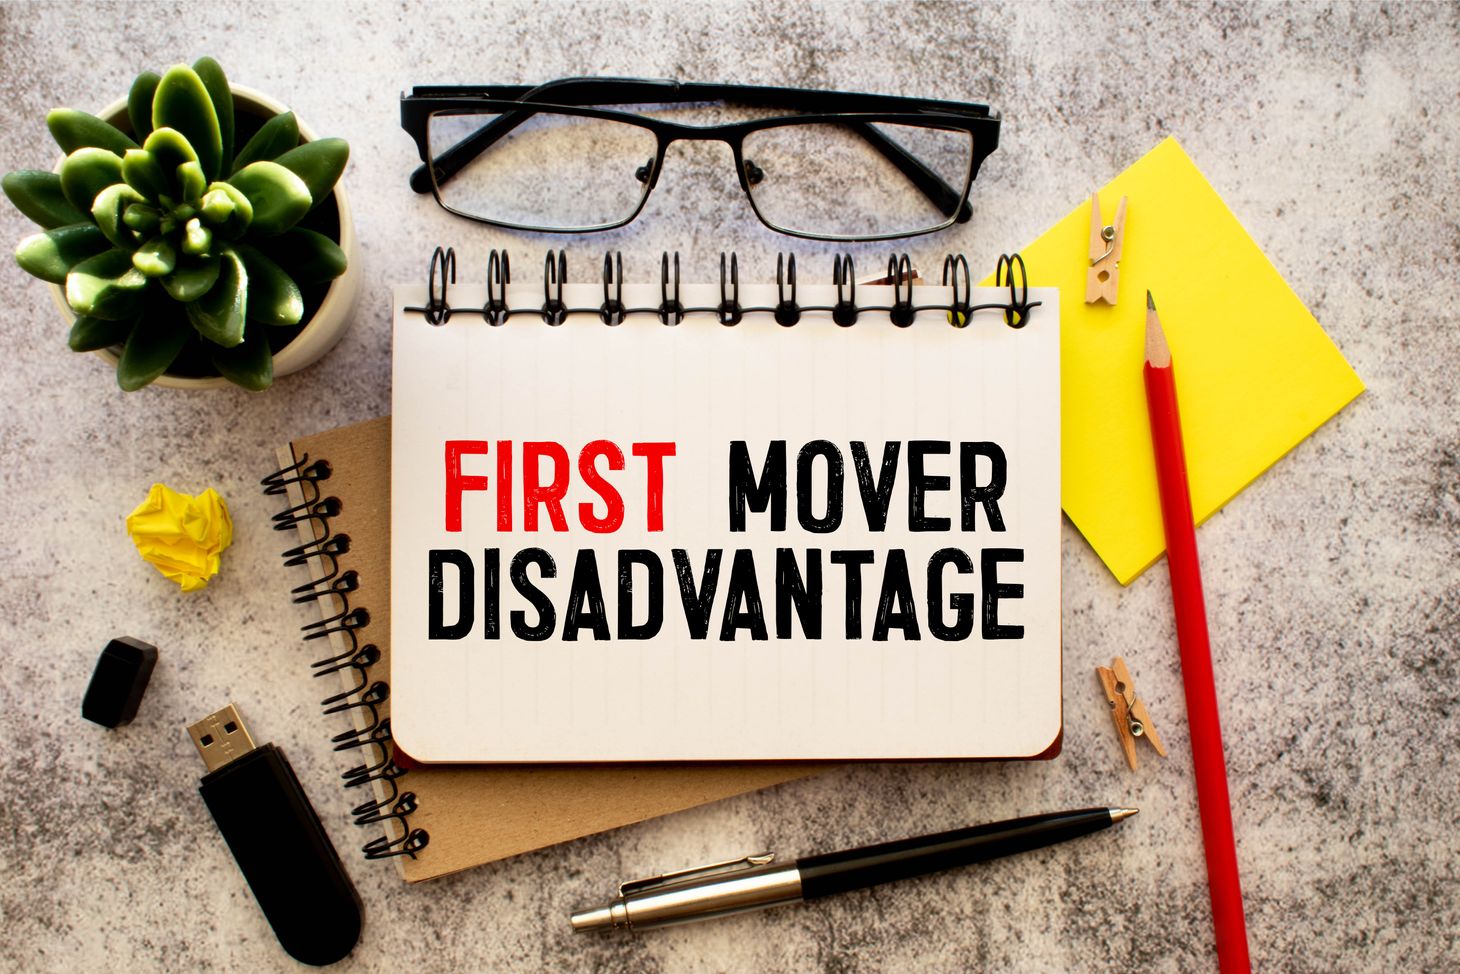 The First Mover Myth: Why Being an Improver is Actually Better